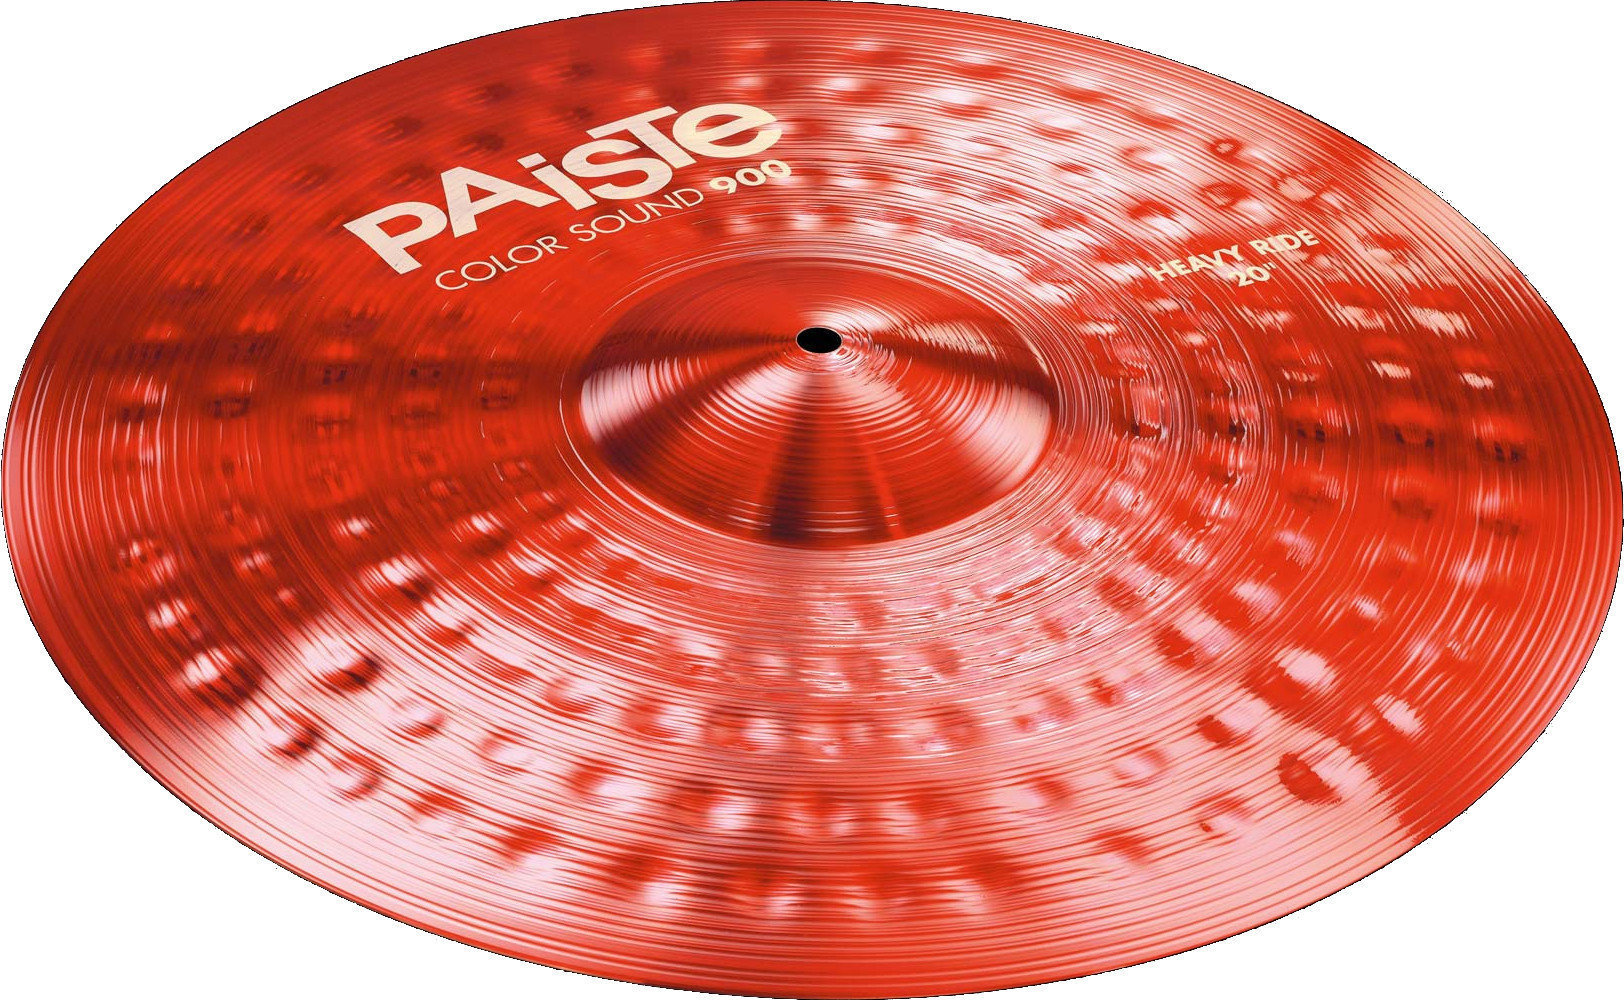 Ride Cymbal Paiste Color Sound 900  Heavy Ride Cymbal 20" Rød